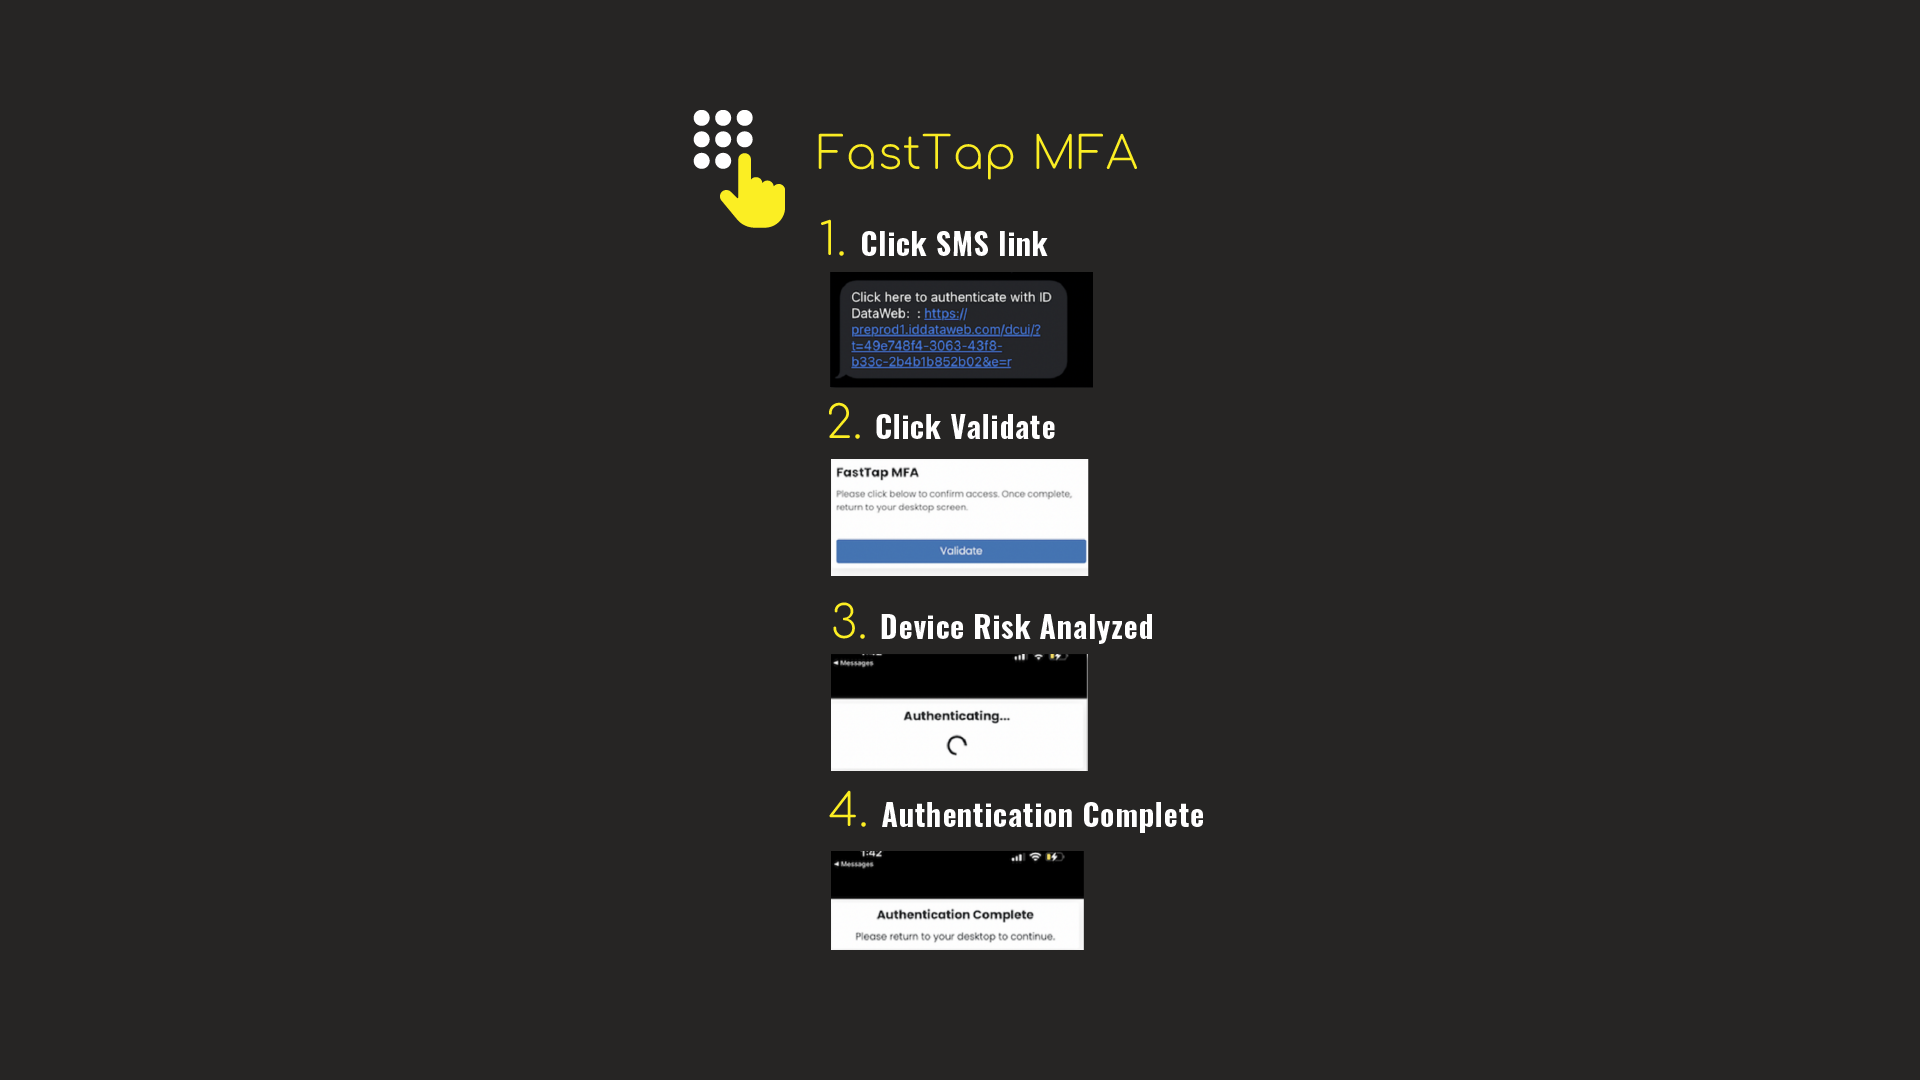 FastTap MFA: additional risk check as part of the MFA process